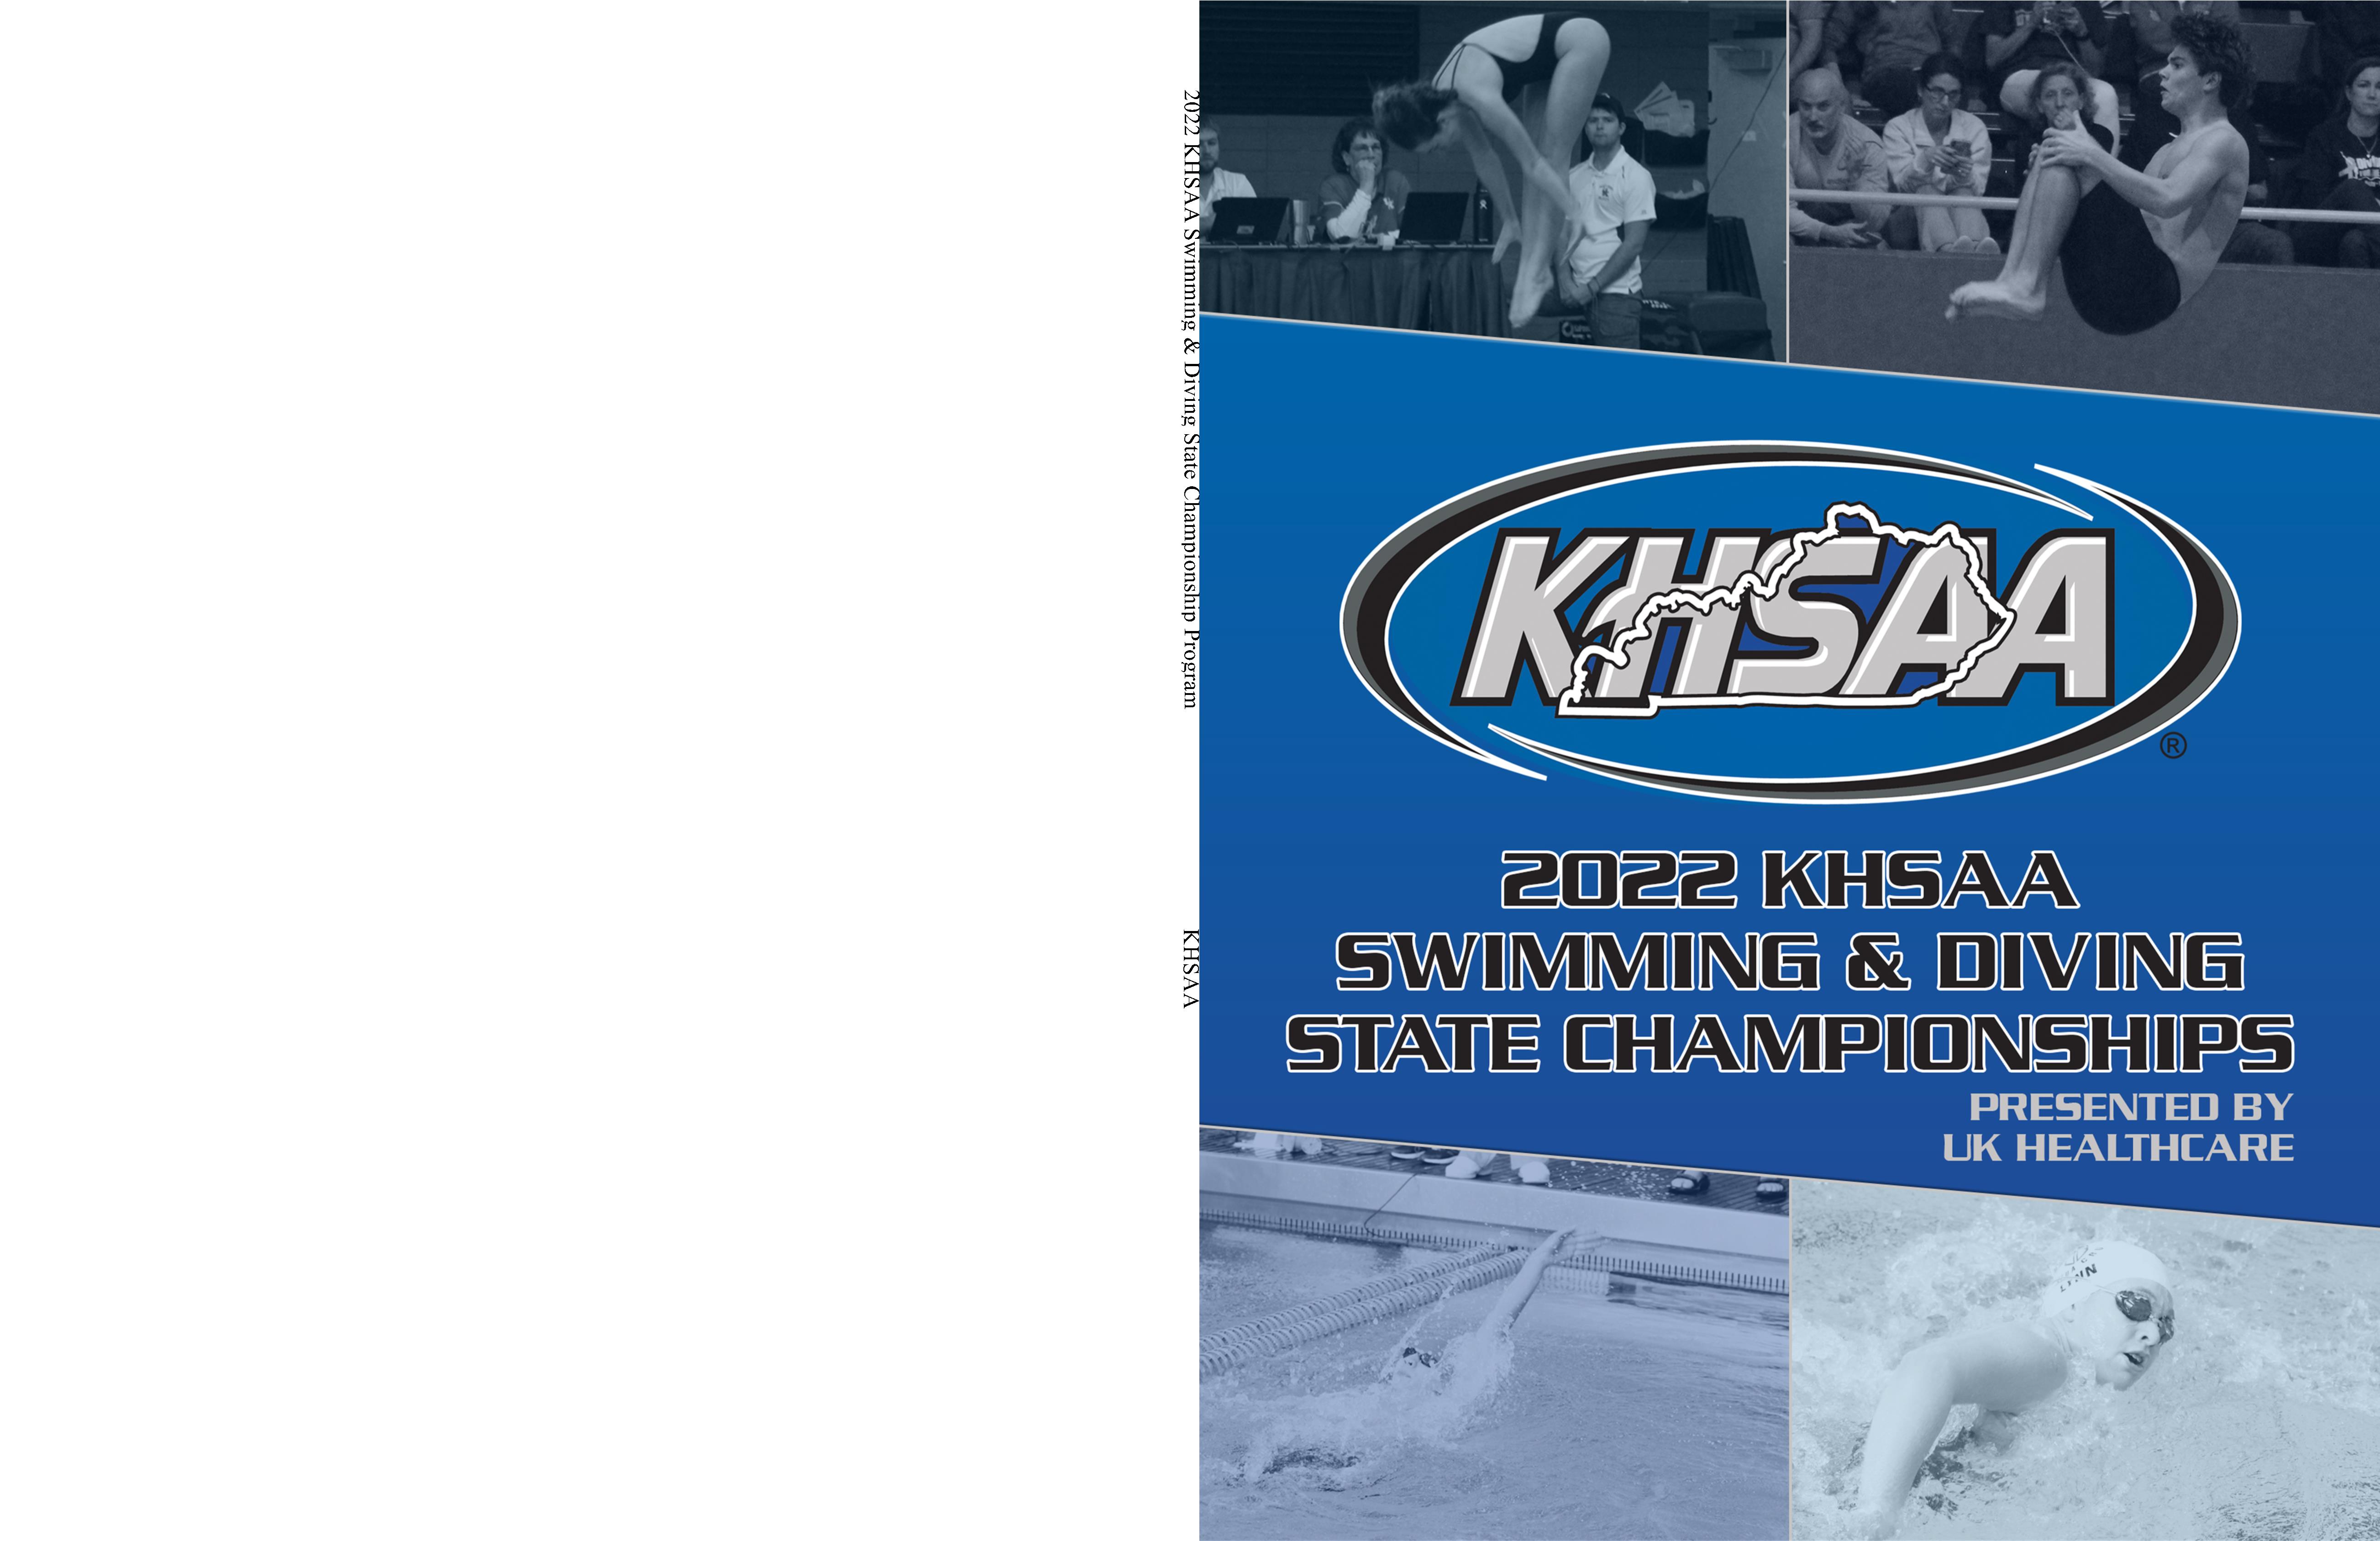 2022 KHSAA Swimming & Diving State Championship Program cover image